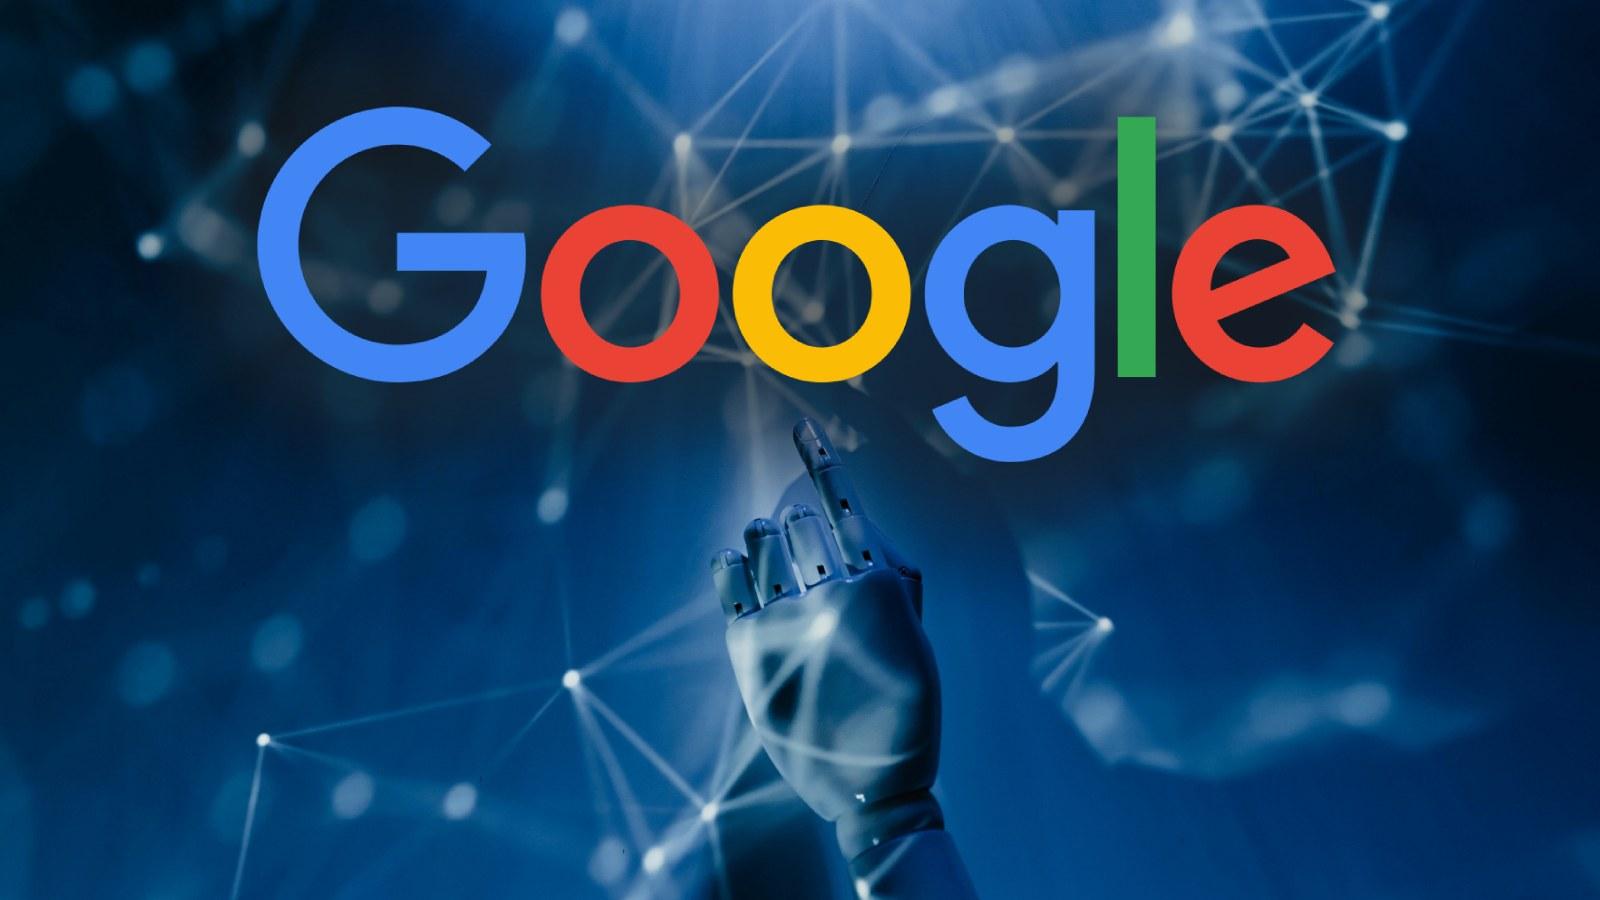 Cyber hand on blue background with Google logo above it